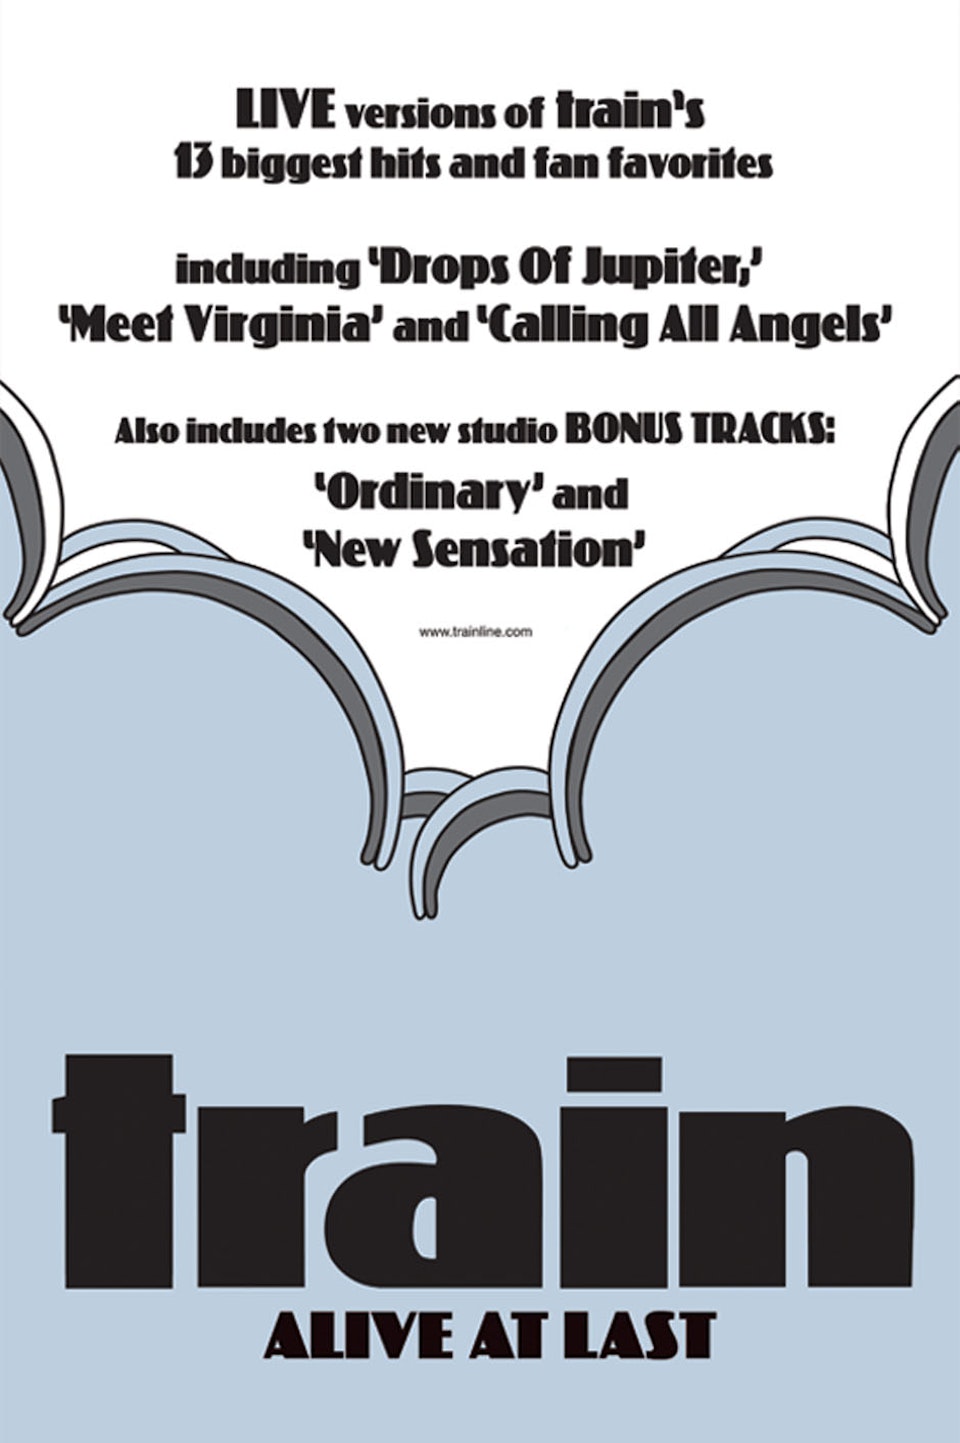 Train Alive at Last - Poster